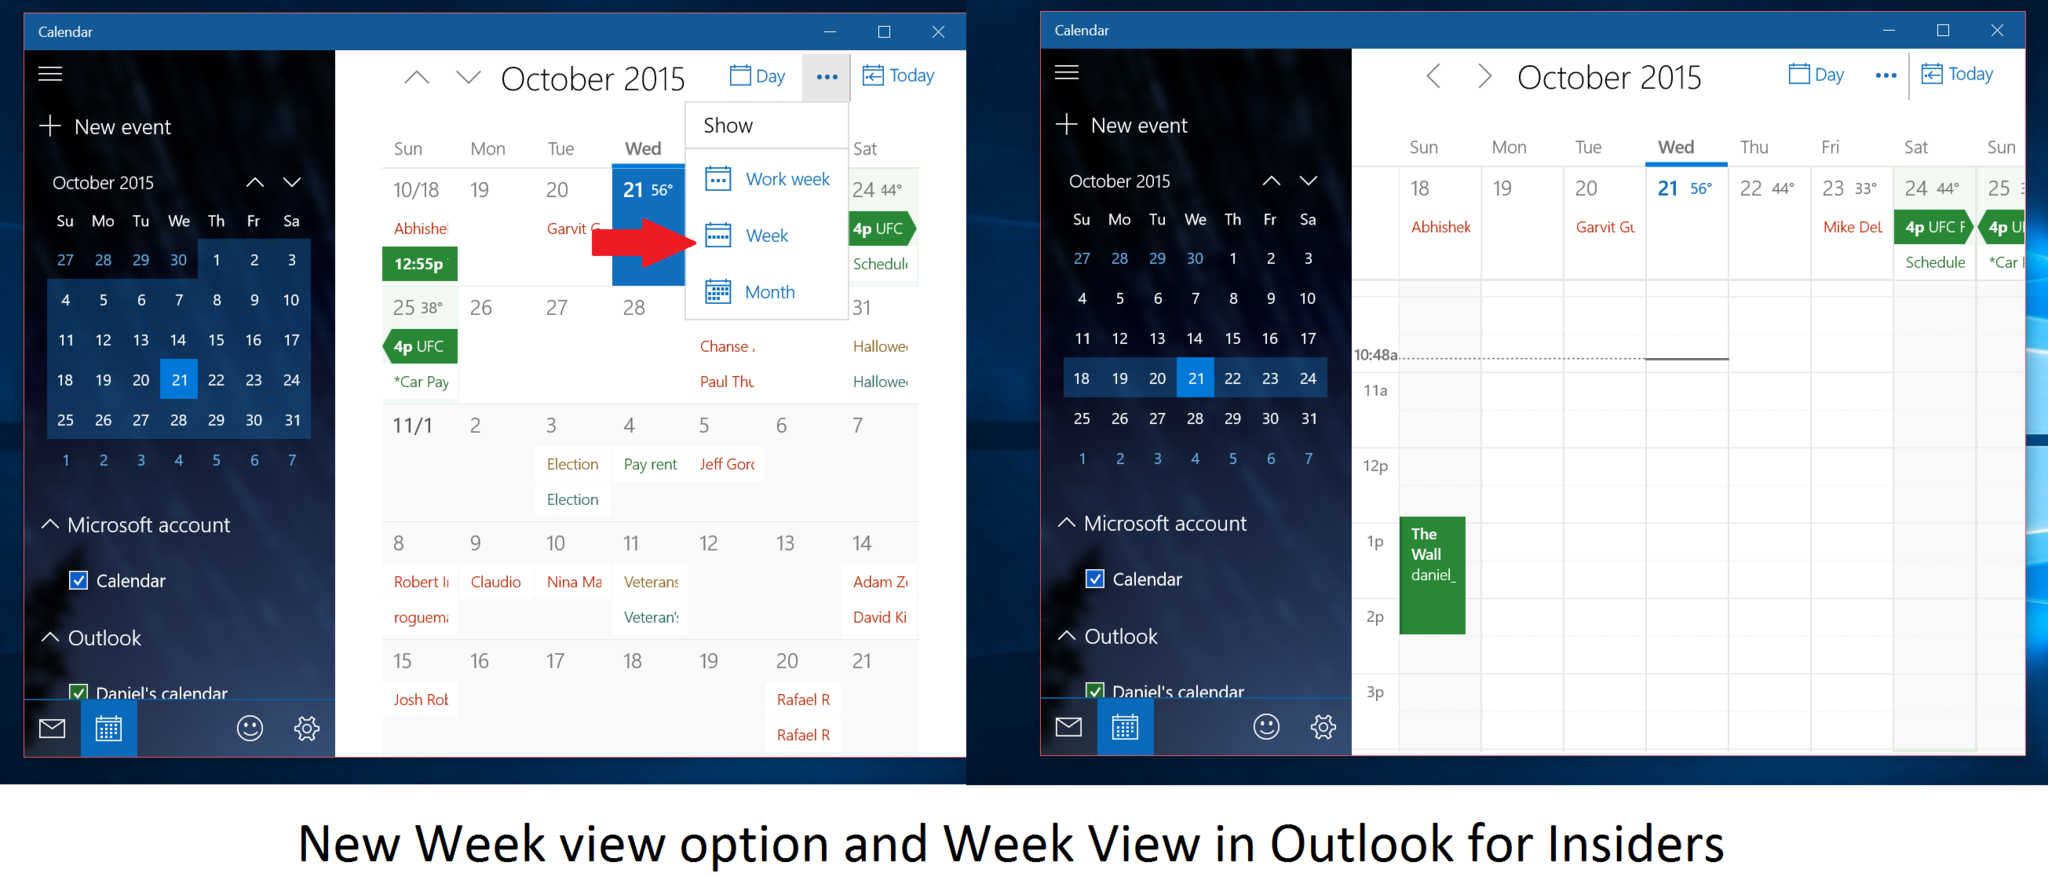 Outlook Mail and Calendar app for Windows 10 PC and Mobile 